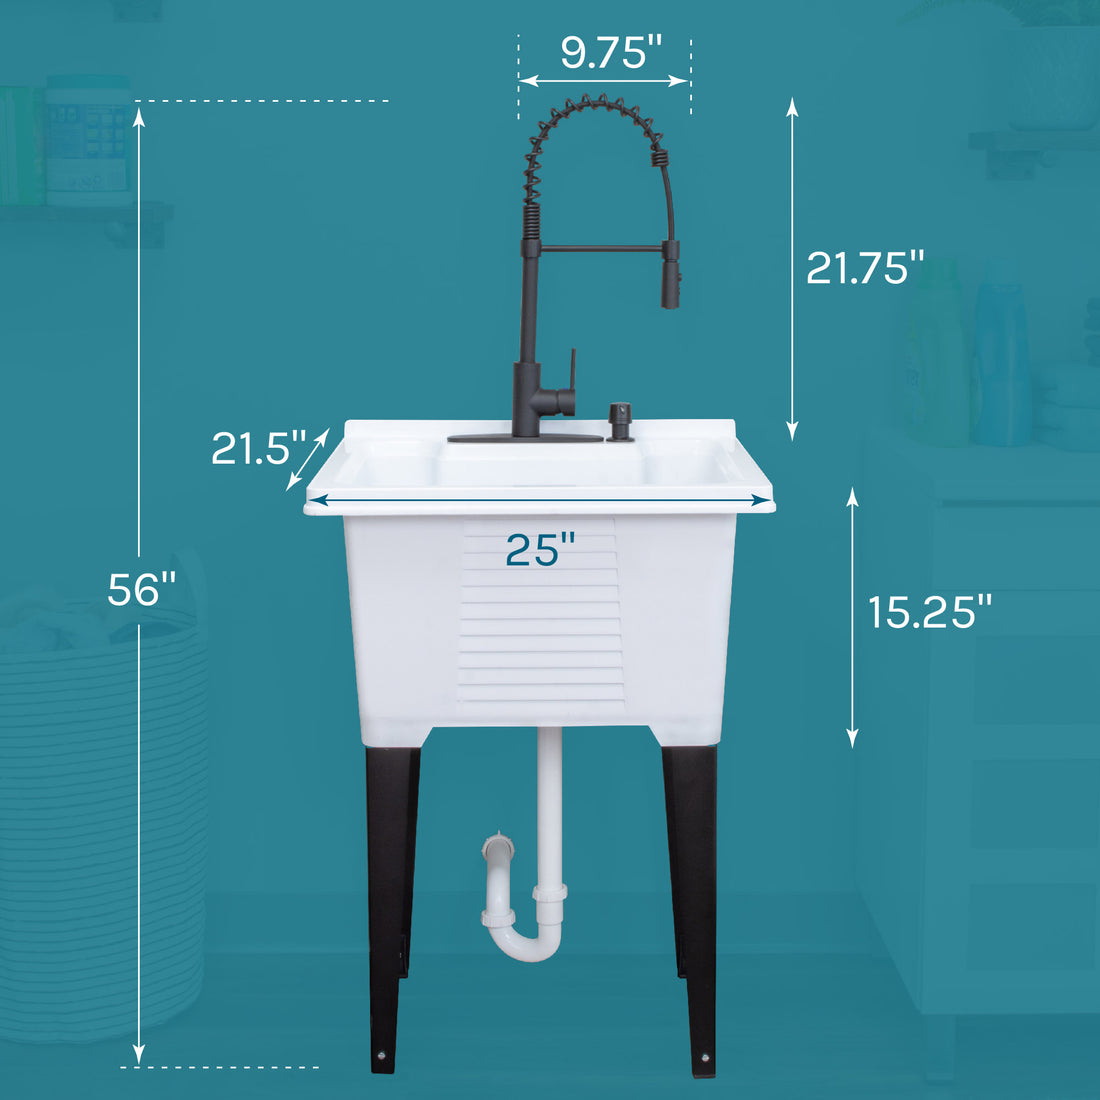 Blue Utility Sinks at